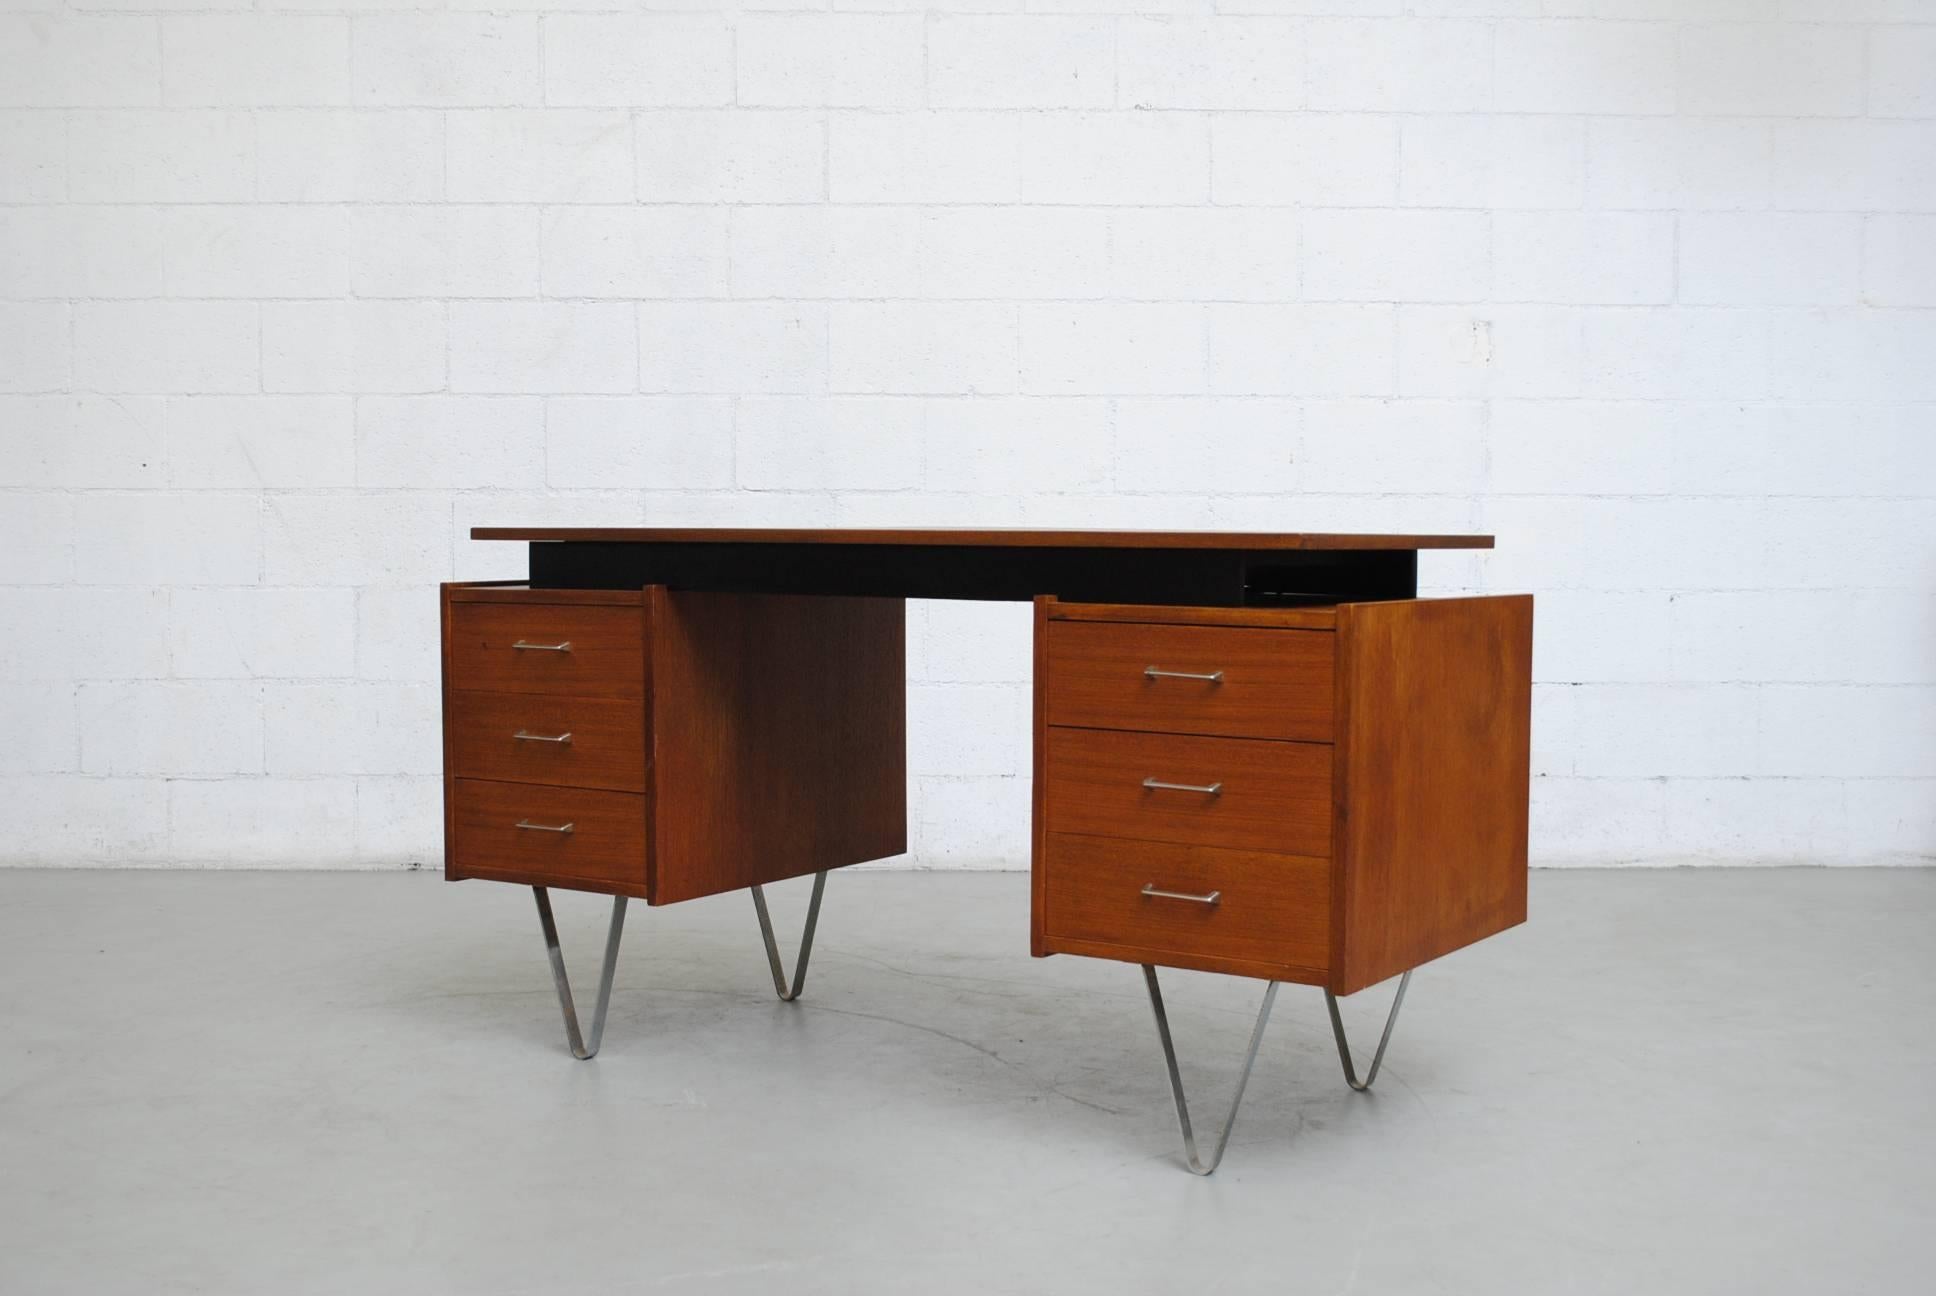 Rare Cees Braakman desk for Pastoe with thick hairpin legs. Side cabinet with sliding birch trays. Stellar and stylish. Good original condition. Minor wear consistent with its age and usage.